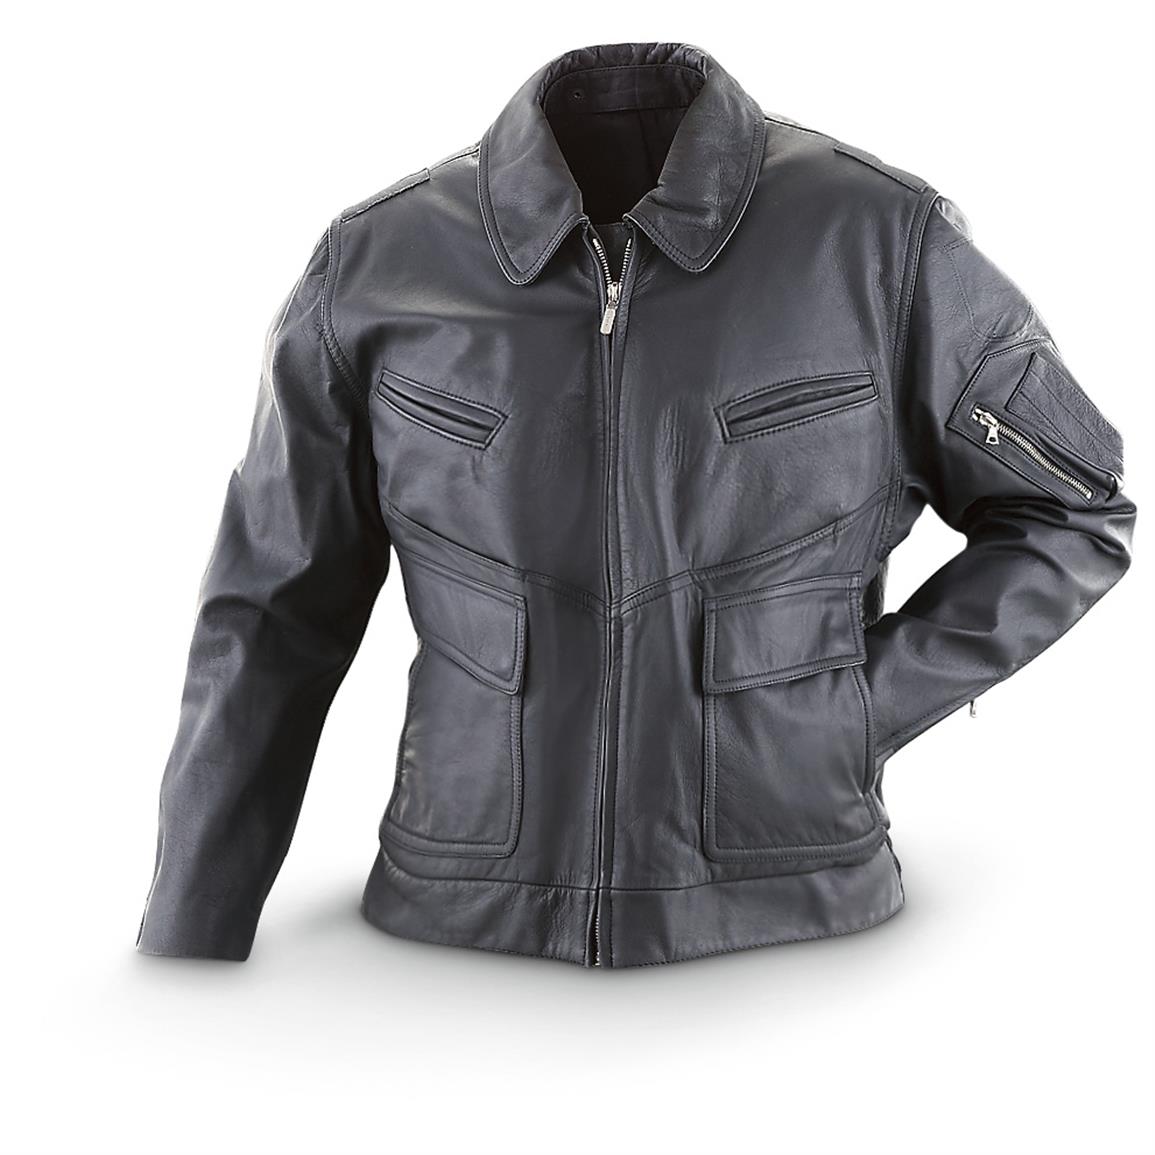 Used Women's German Police Leather Jacket